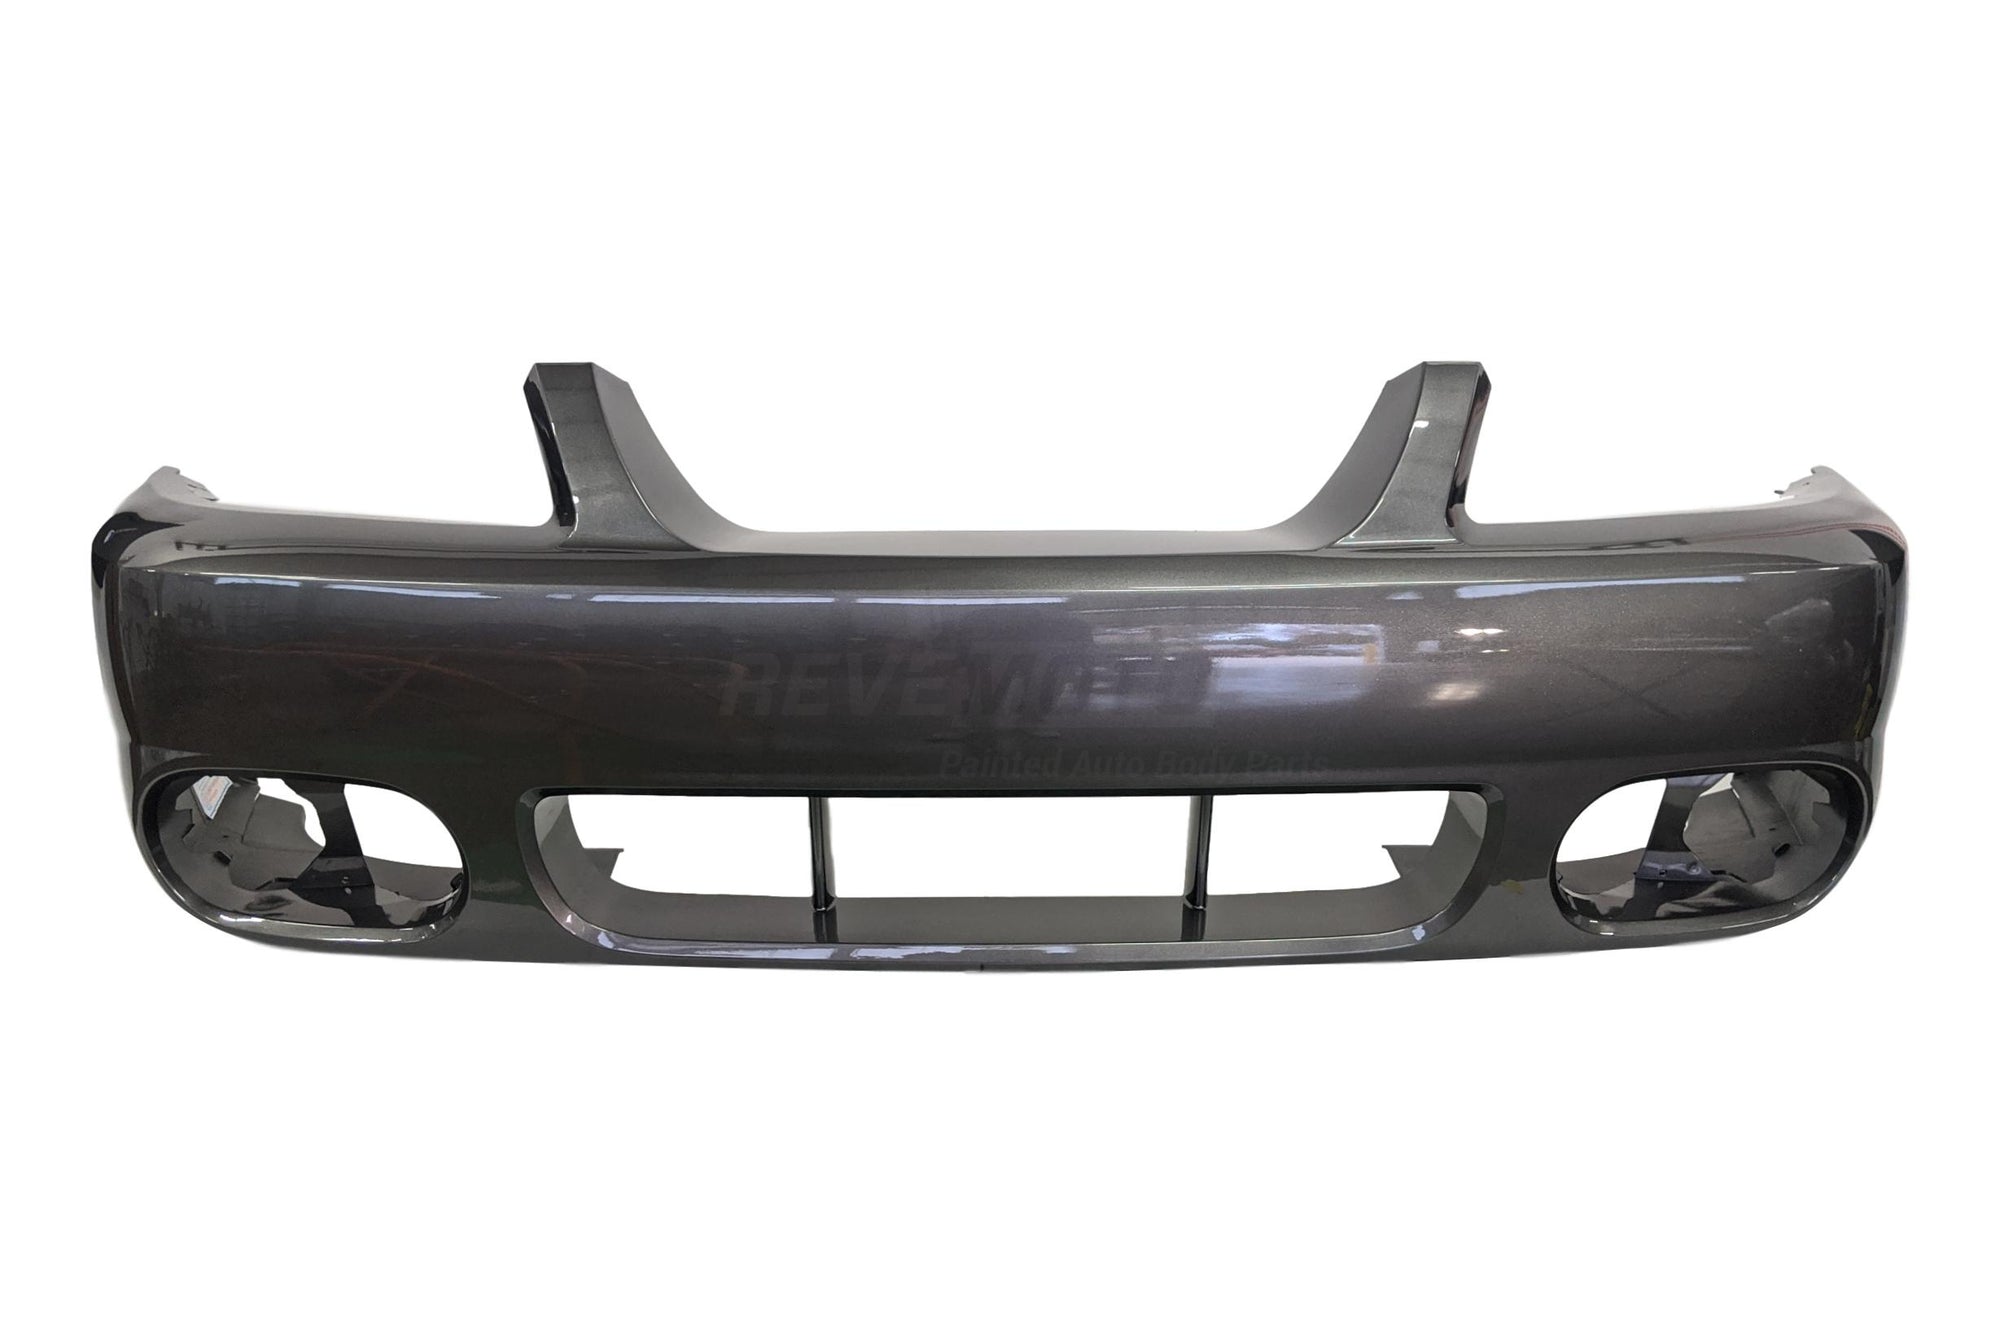 2003-2004 Ford Mustang Cobra Front Bumper Painted Dark Shadow Gray Metallic (CX) 2R3Z17D957BAFO1000533 